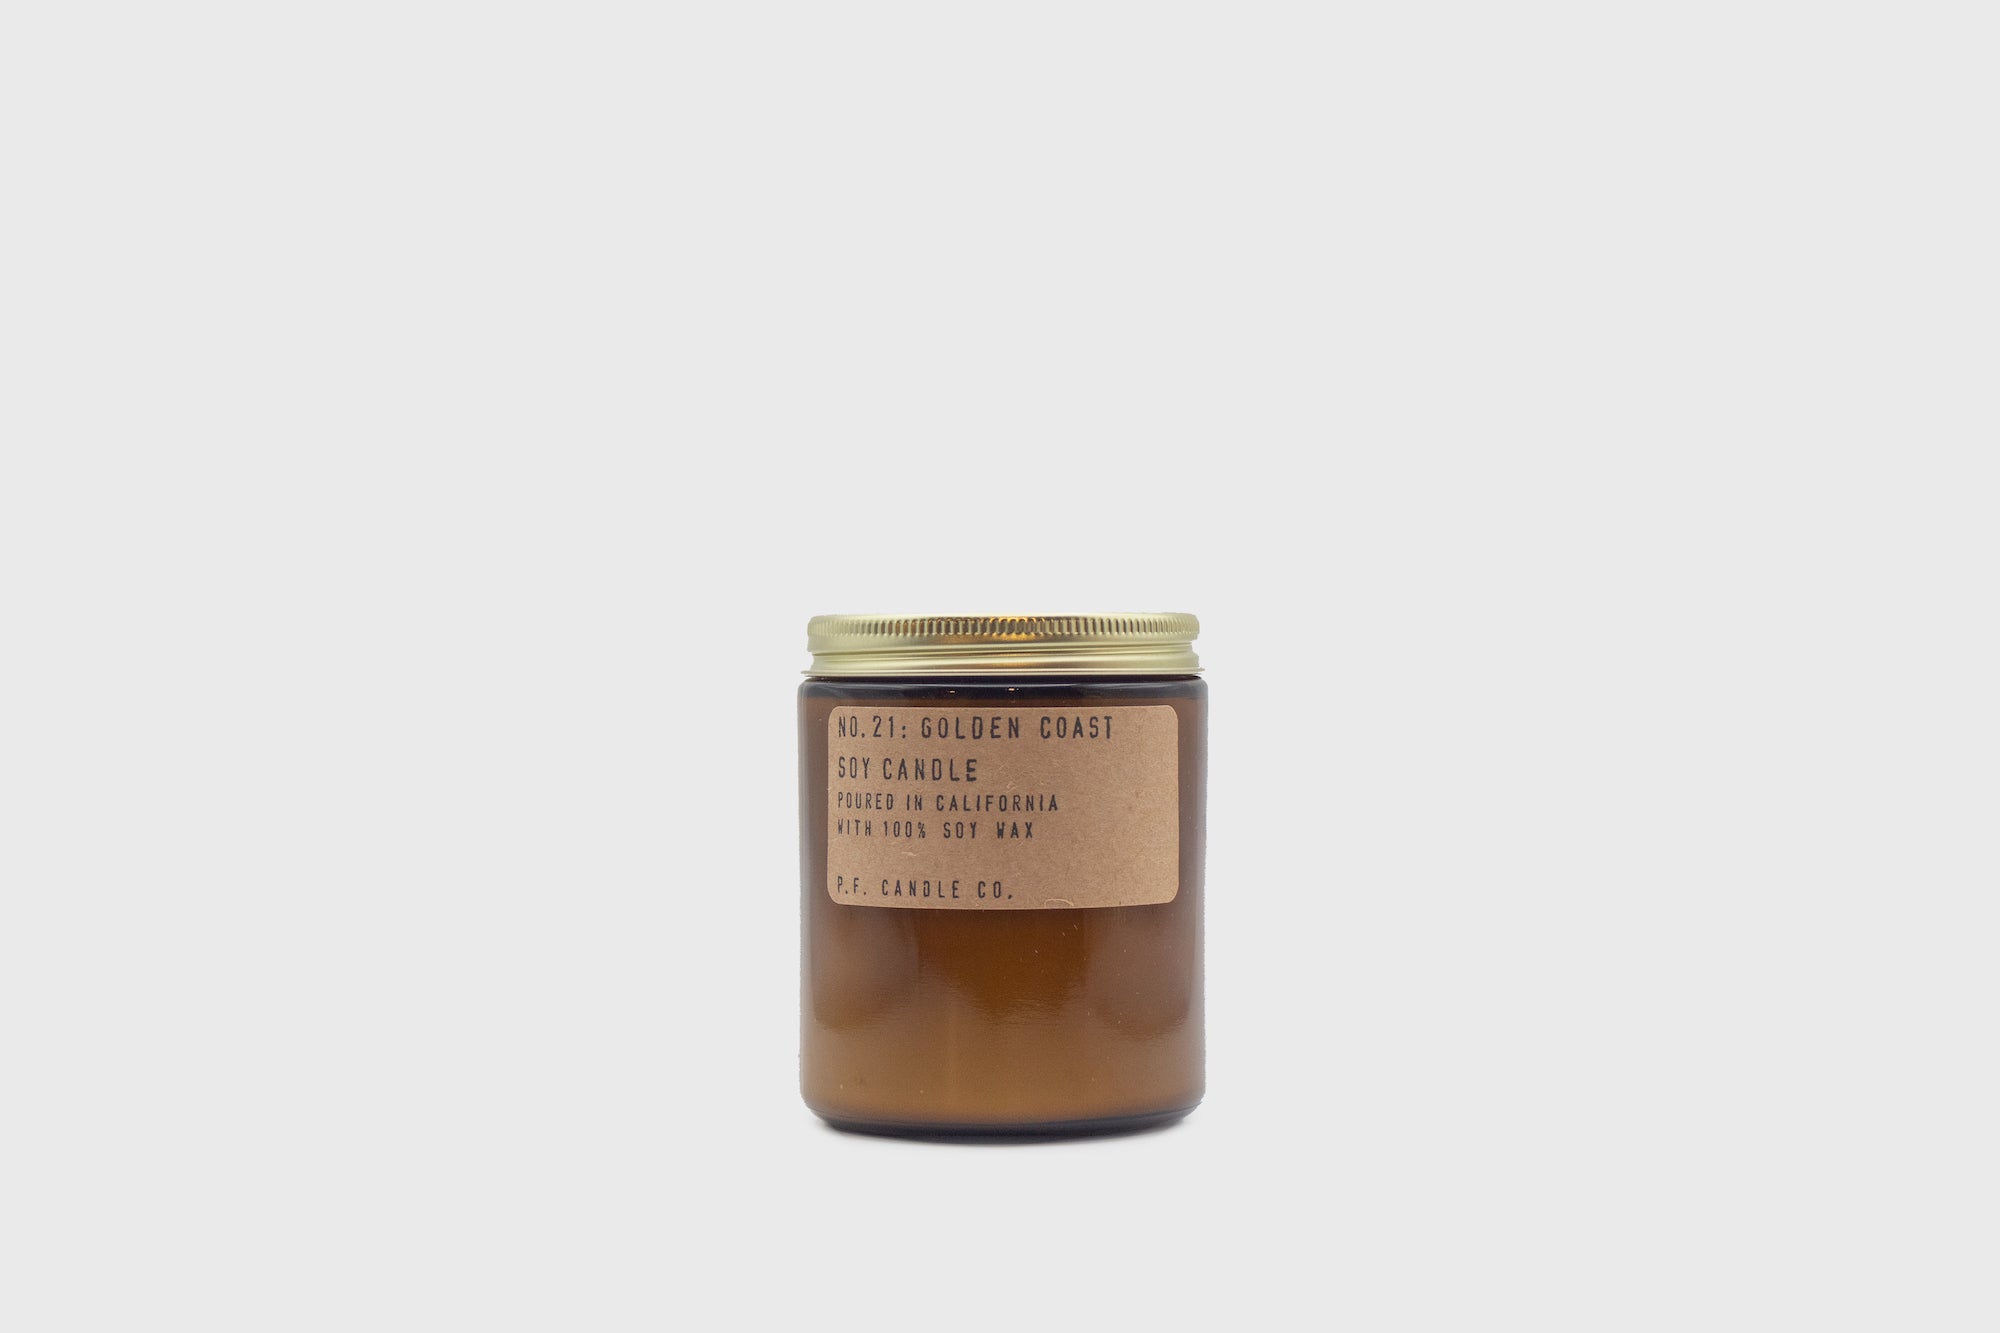 Soy Candle [Golden Coast] Candles &amp; Home Fragrance [Homeware] P.F. Candle Co. 7.2oz   Deadstock General Store, Manchester